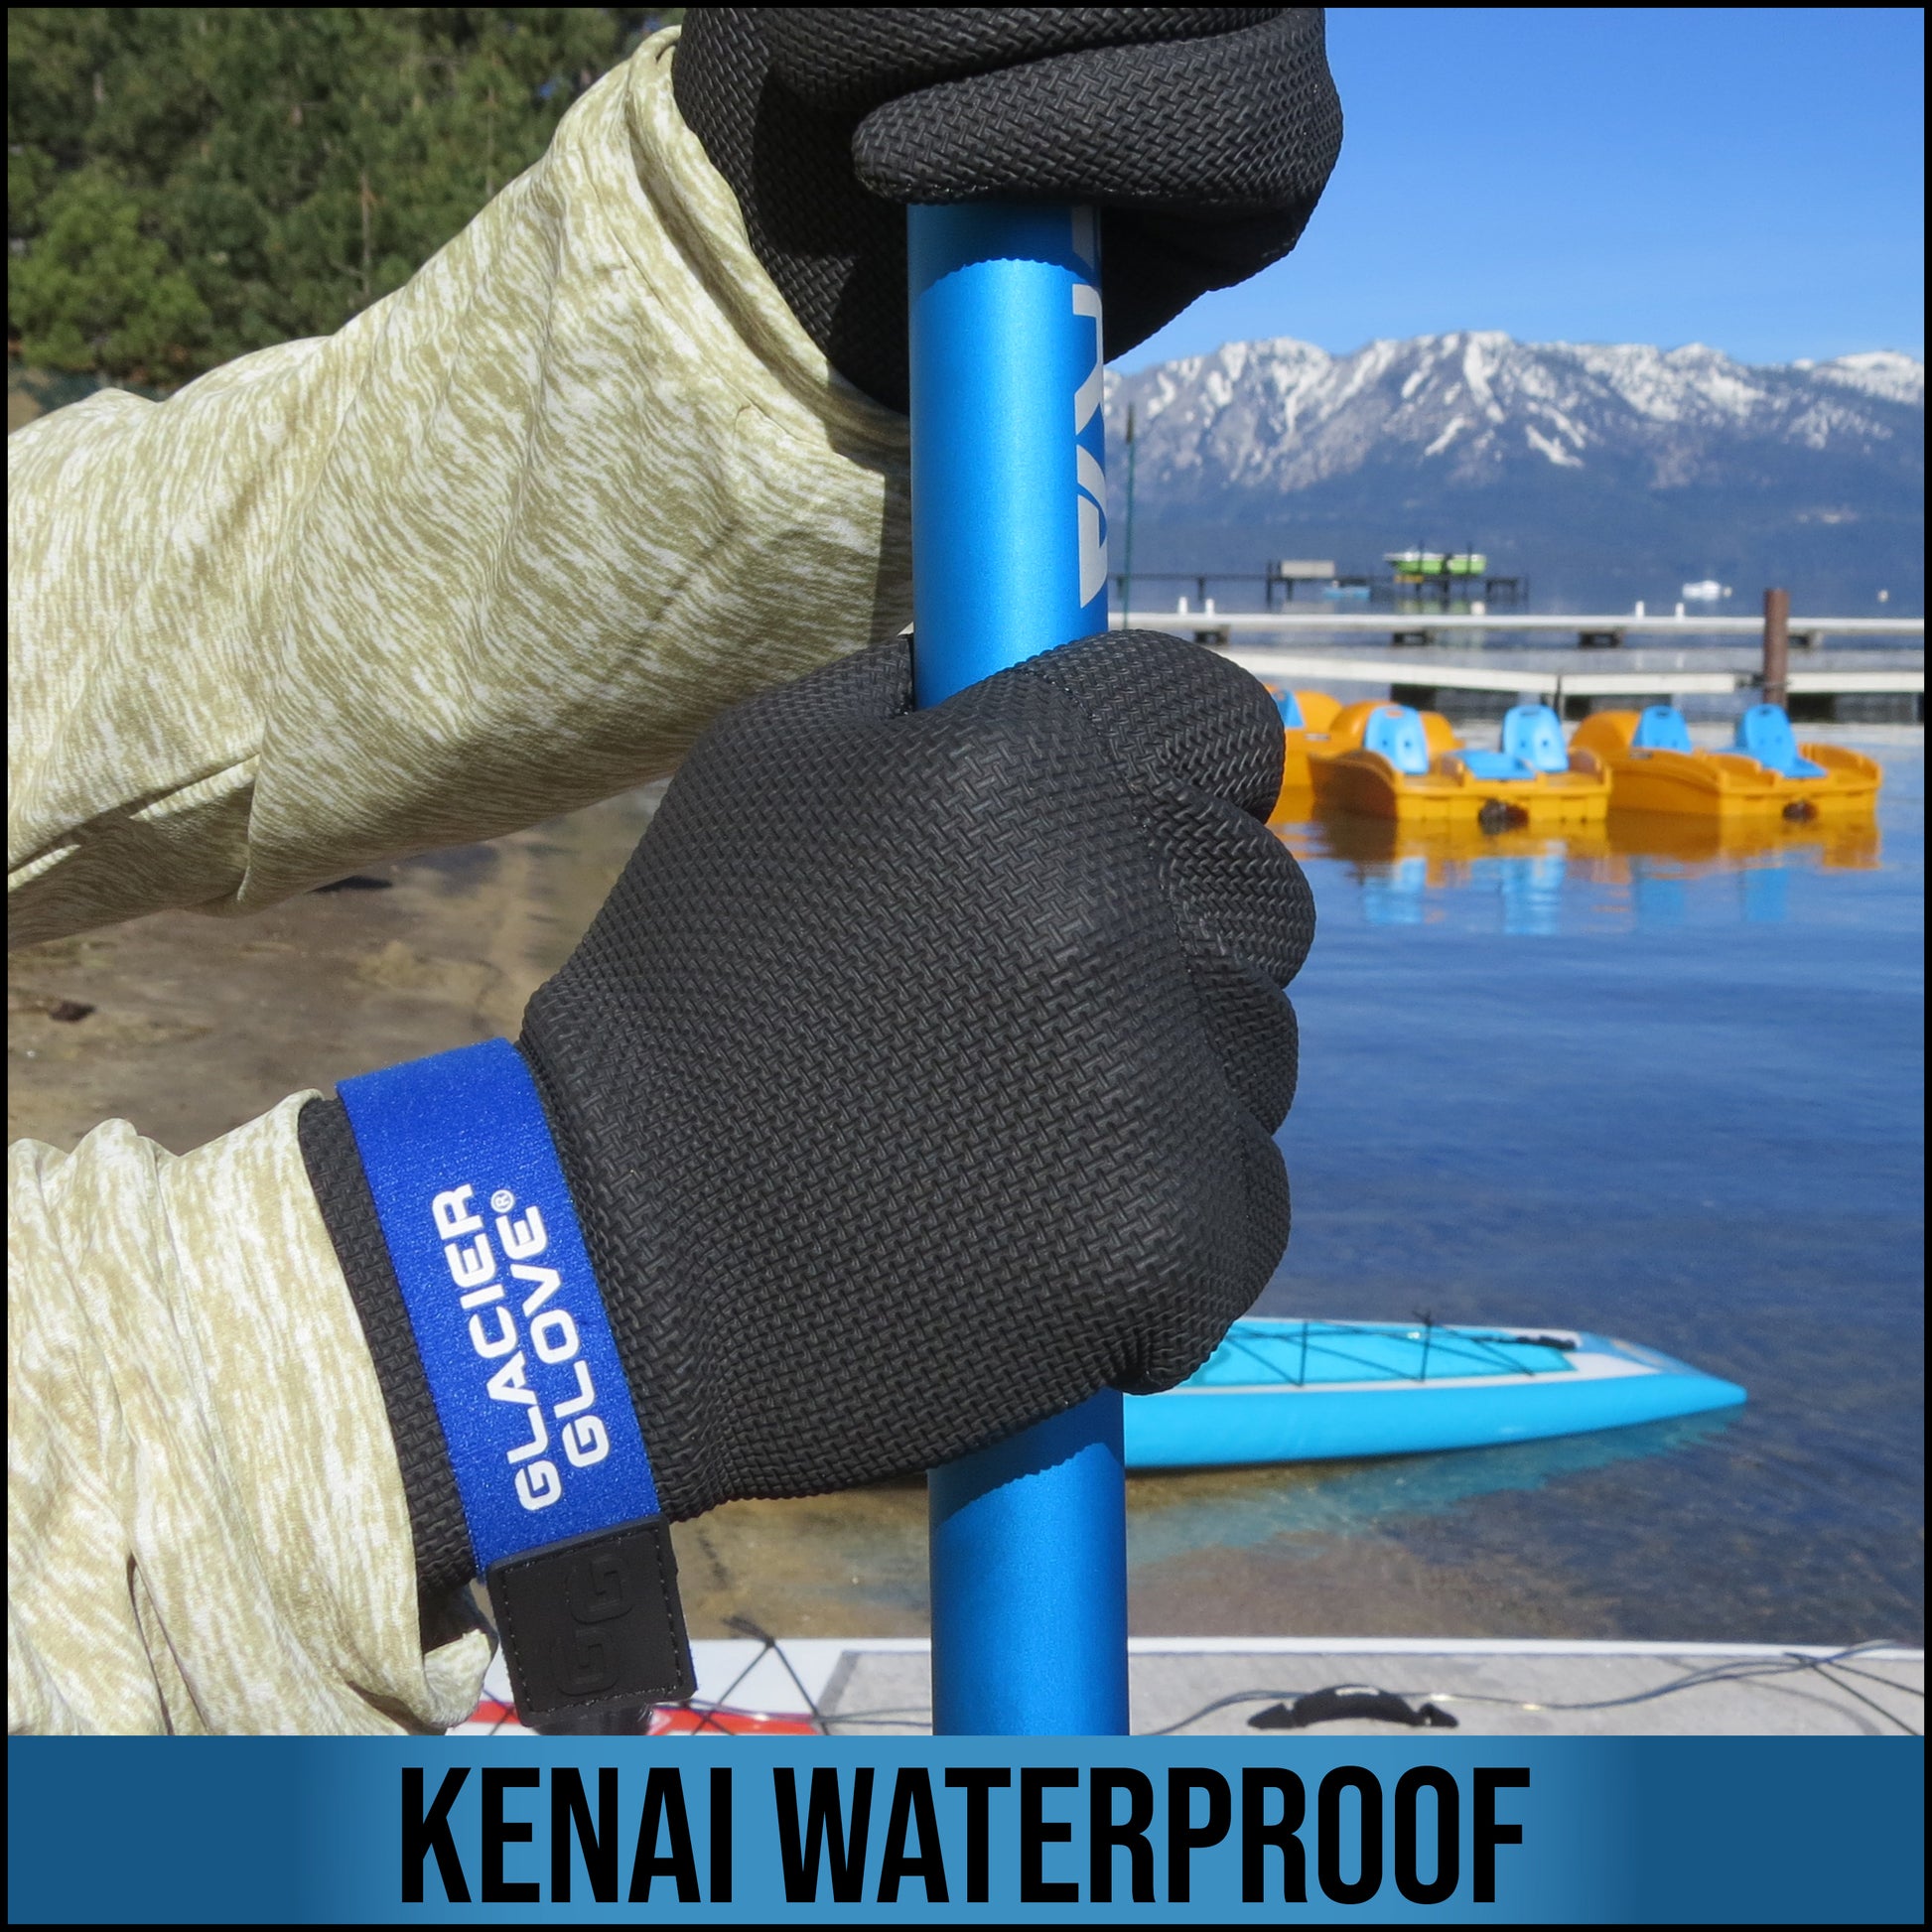 The Kenai Waterproof is built to be your favorite glove. Its durability and functionality combined with warmth and comfort makes this glove the perfect choice for cold, wet conditions.